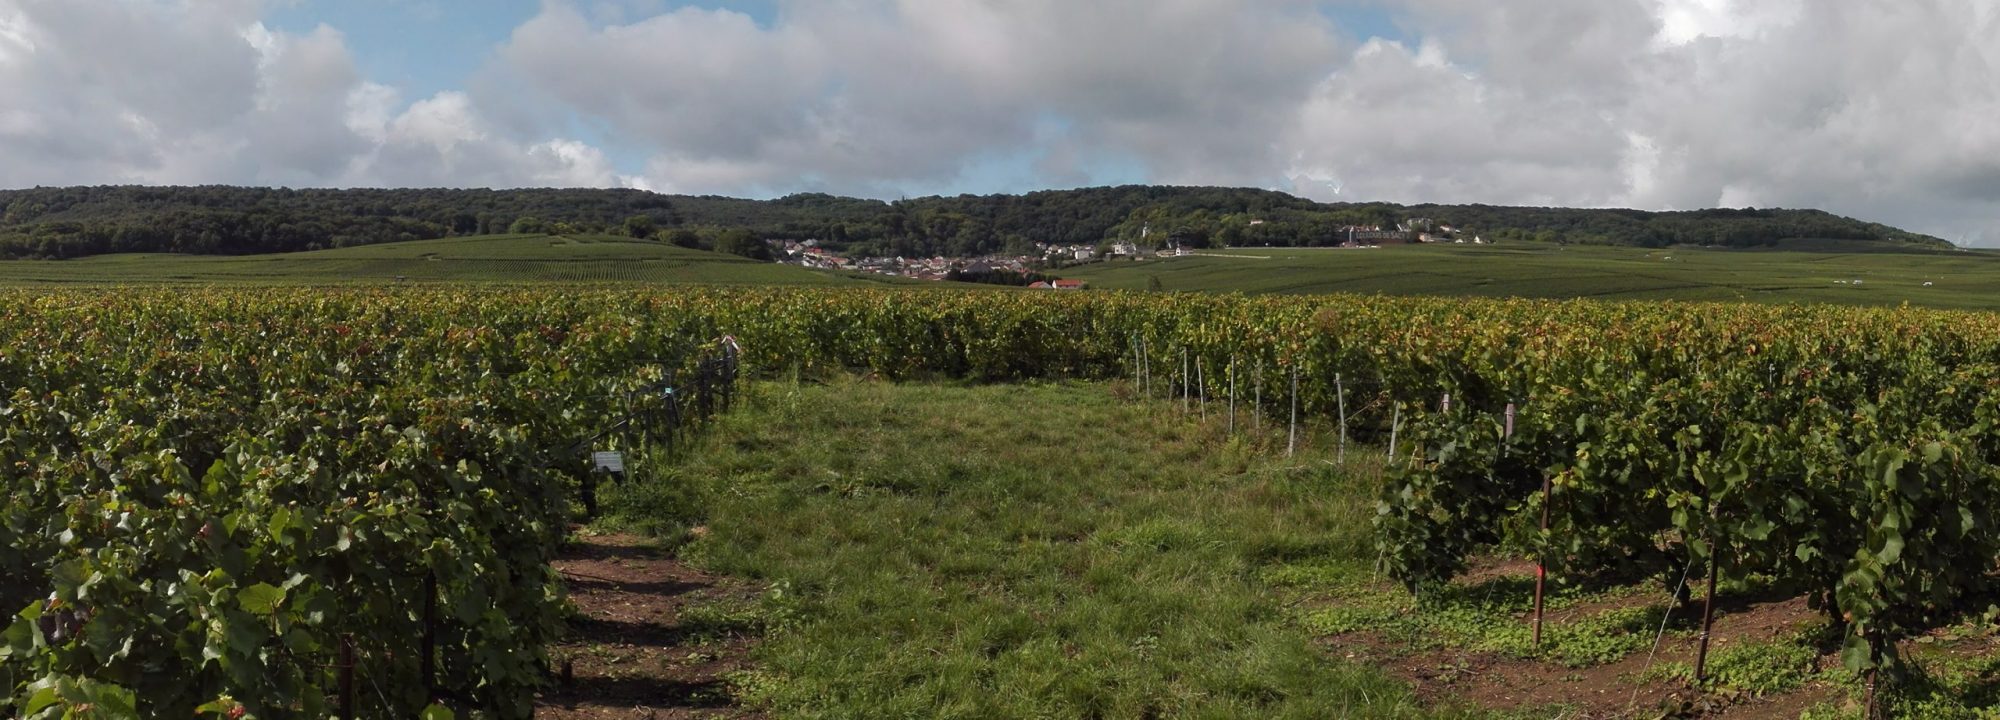 Our Vineyards - Highly sustainable viticulture in an exceptional, <br />
Grand Cru Terroir